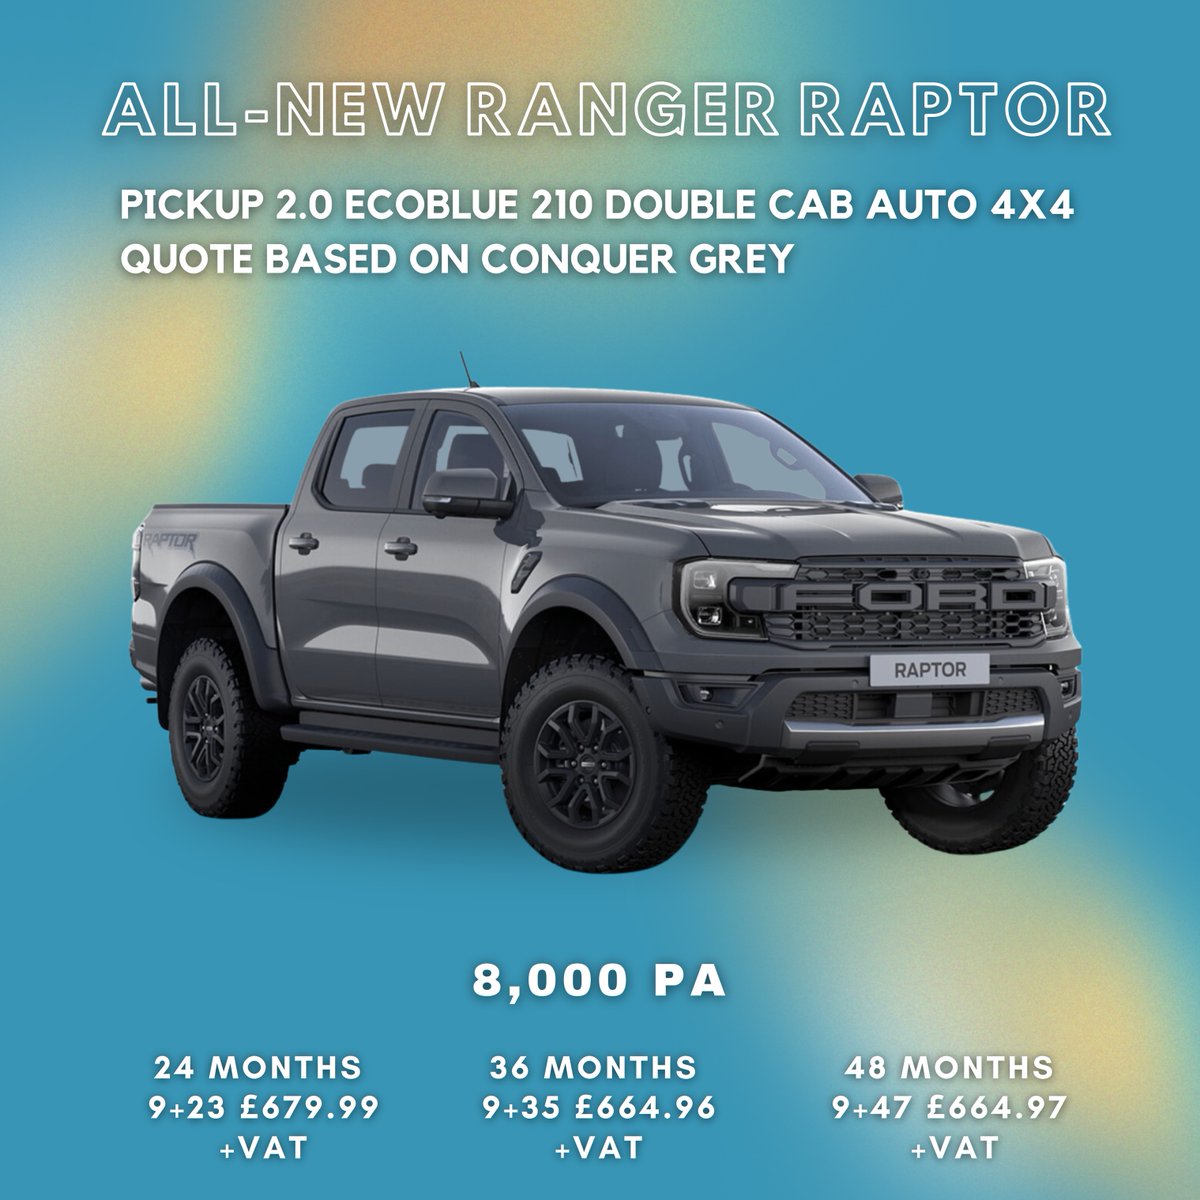 Discover some great offers on the Ranger Raptor at Hills Contracts ⚡

Call us on 01562 821 446 | 07825 515 090

#ContractHire #FinanceLease #Kidderminster #Ranger #RangerRaptor